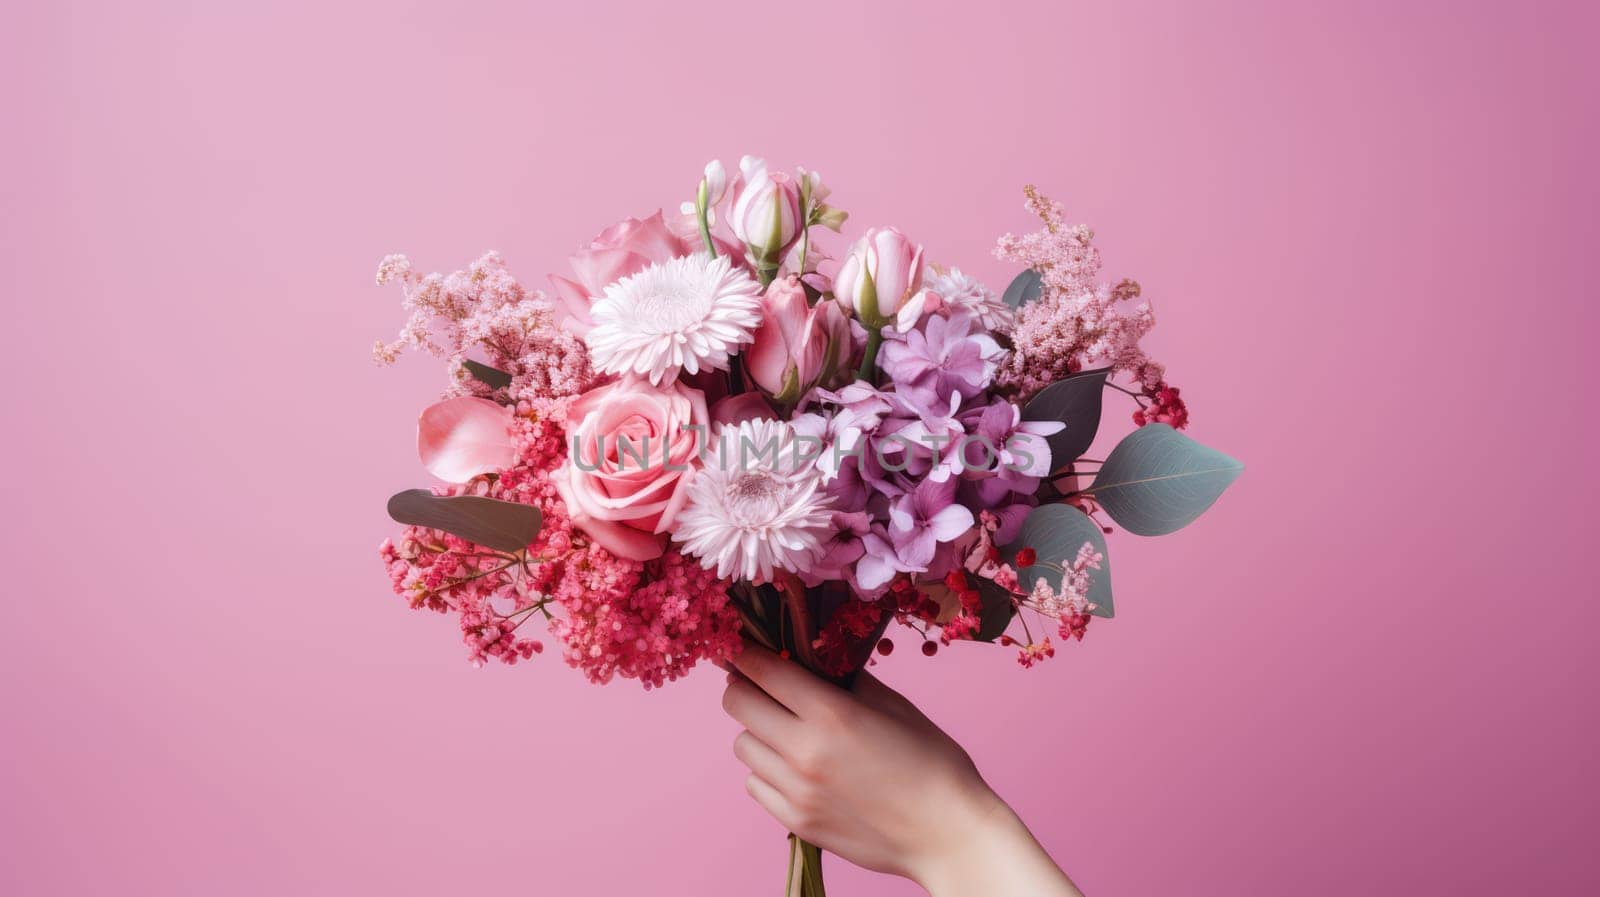 Blooming Beauty: Feminine Elegance and Nature's Delight, a Breathtaking Bouquet of Fresh Pink and White Flowers Held by a Woman, a Perfect Gift for Celebrating Love and Romance on a Spring Holiday, Expertly Arranged by a Skilled Florist against a Lush Gree by Vichizh